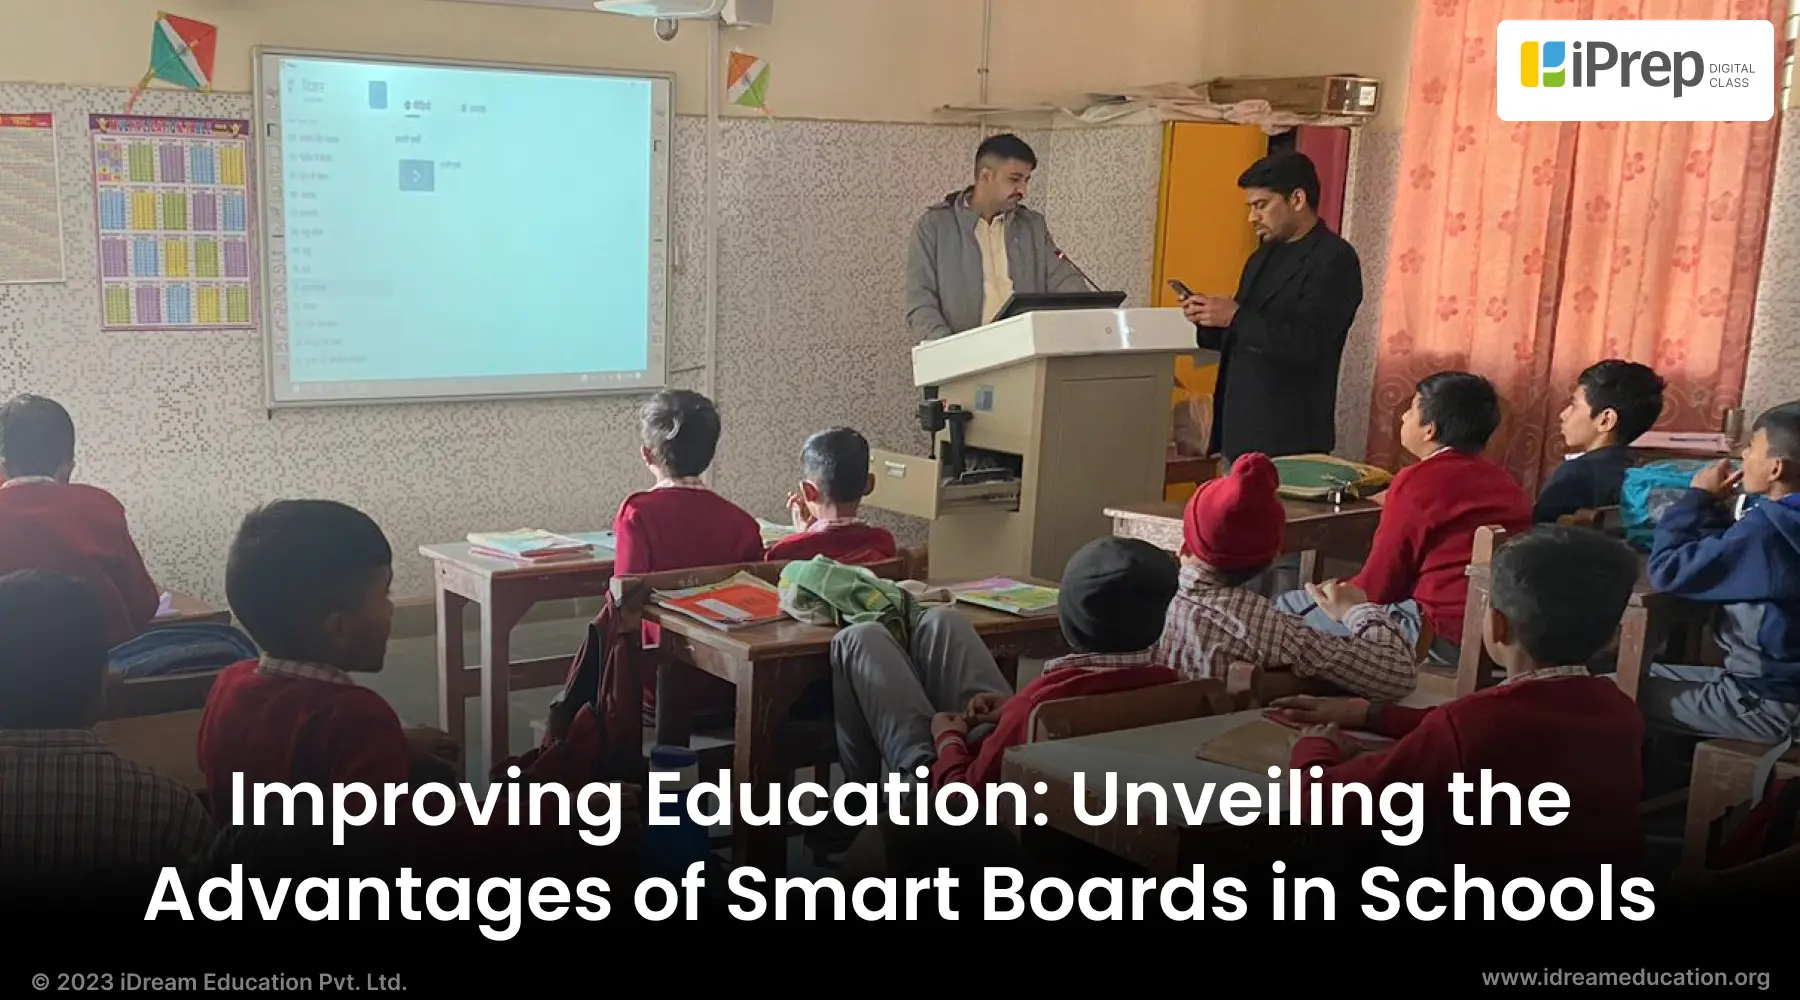 A visual displaying school students and teachers unveiling the advantages of smart boards in schools for improving education